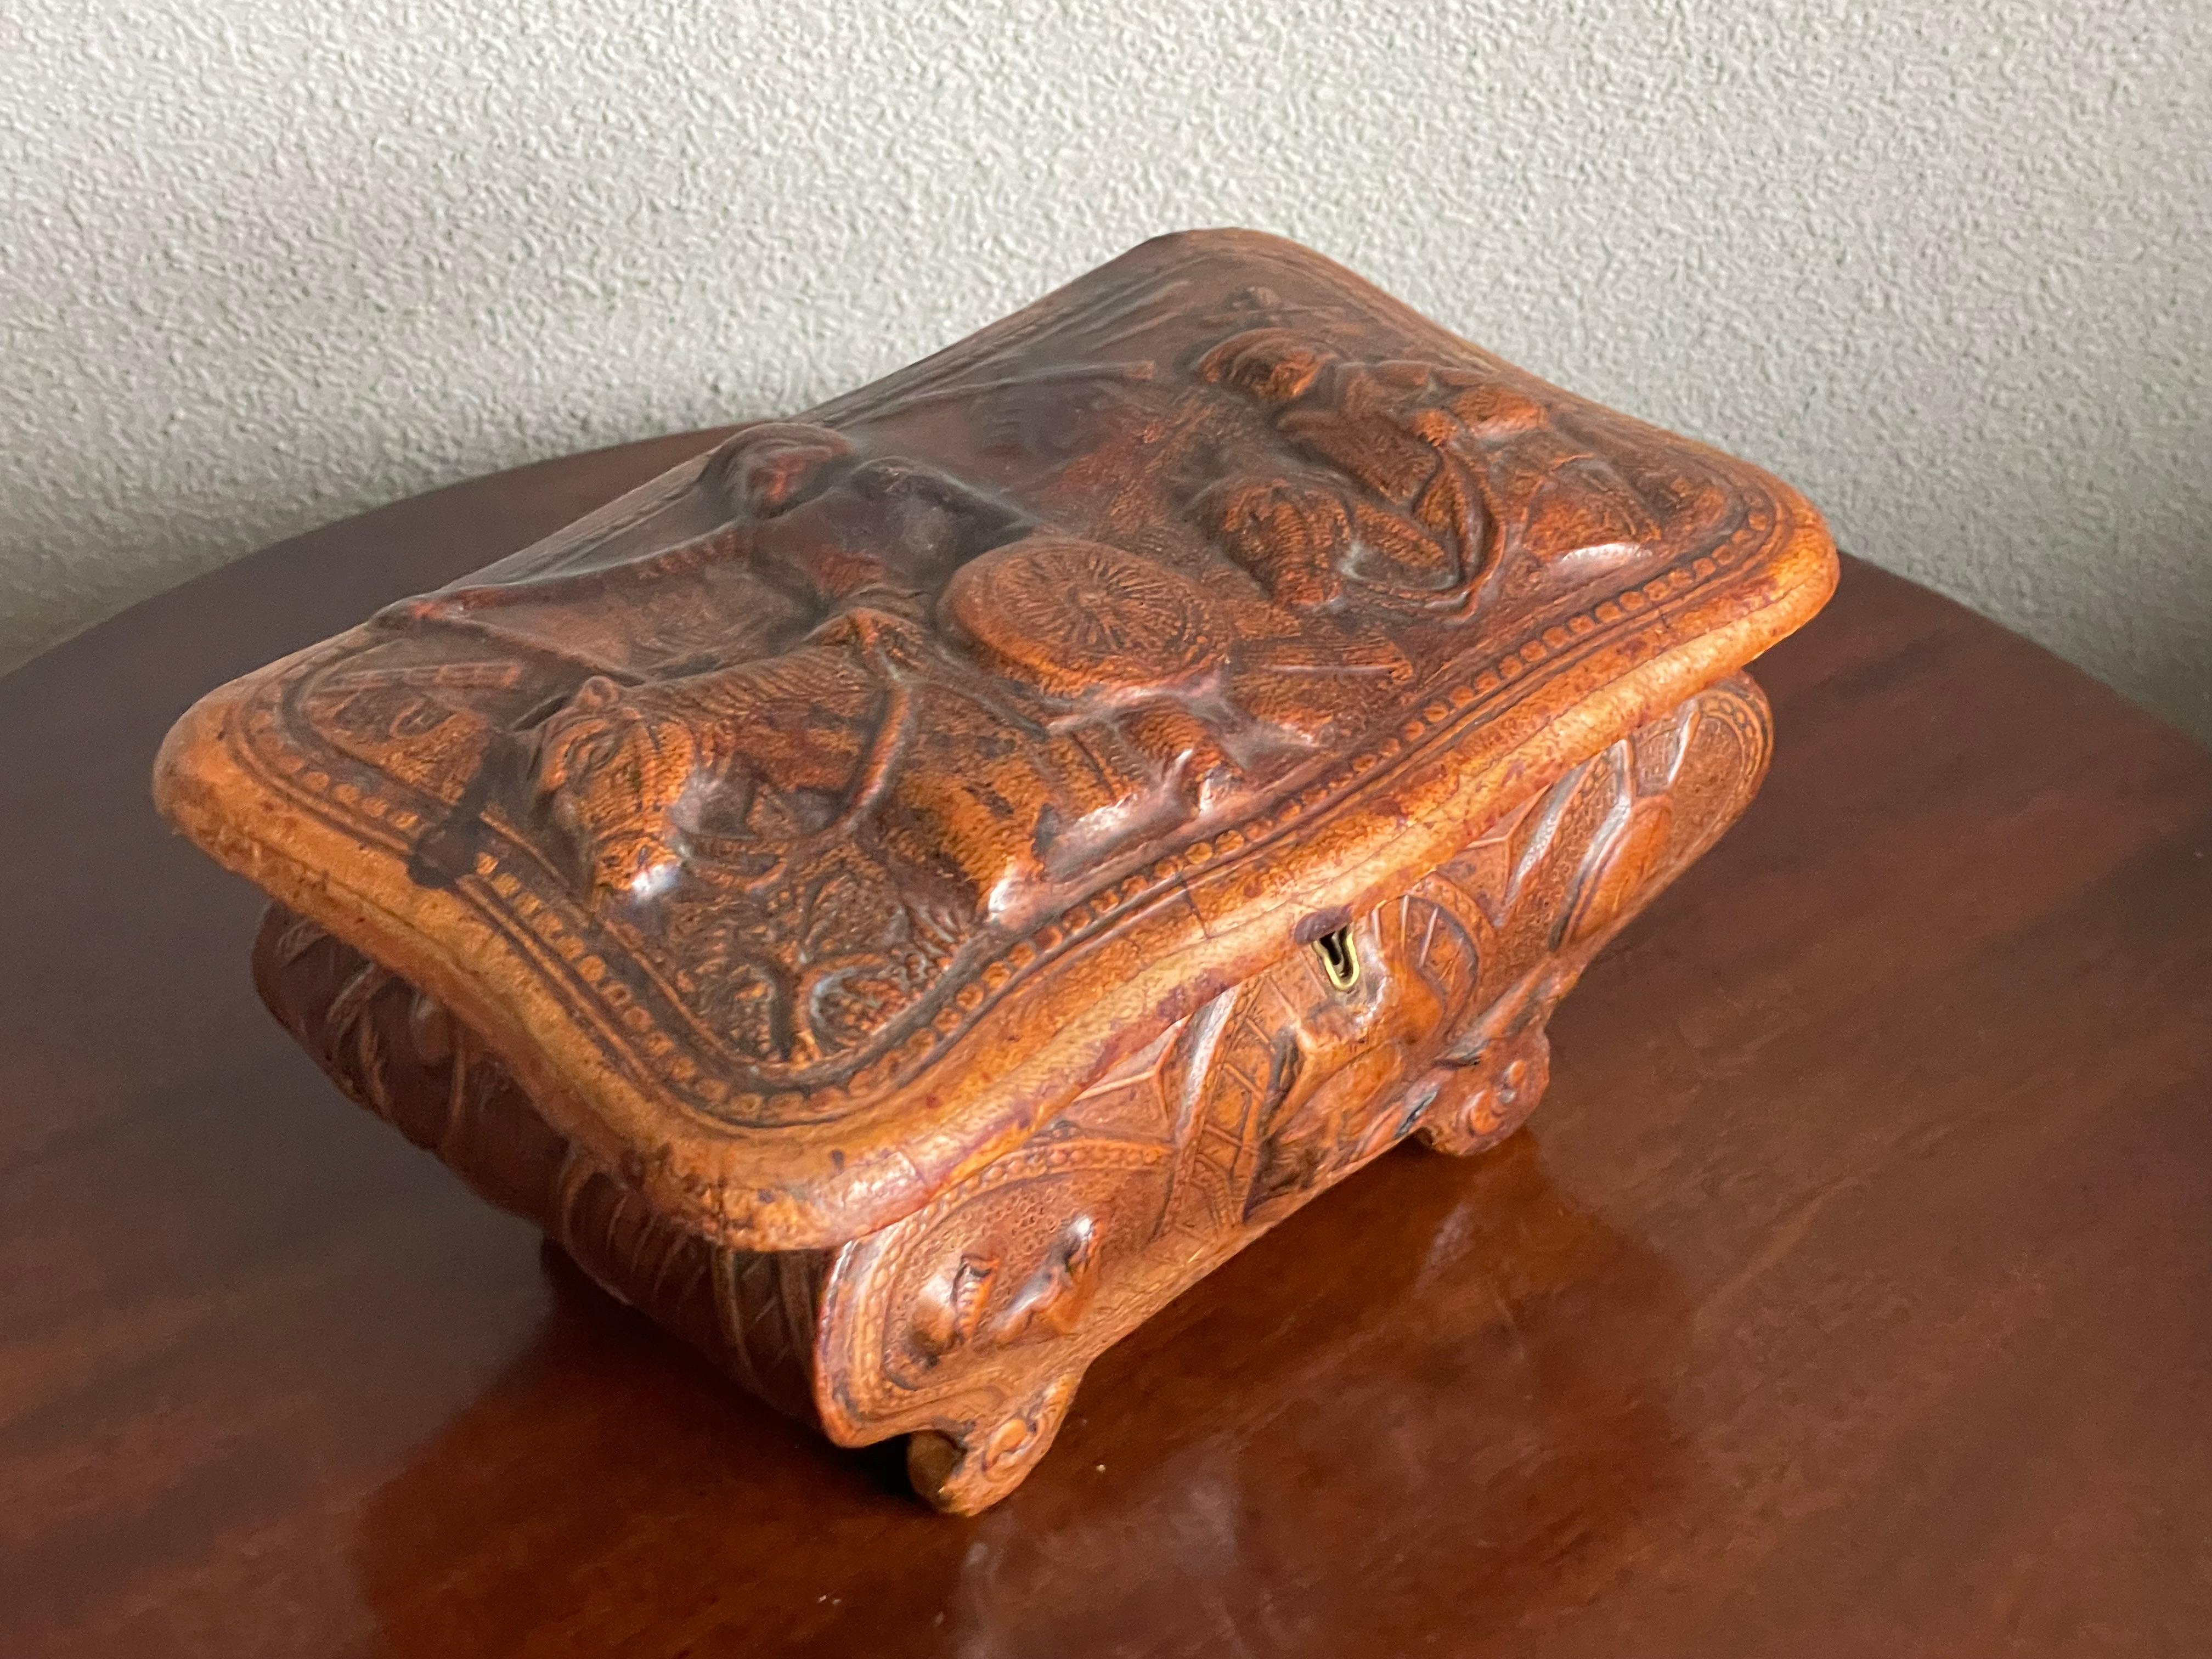 Stunning Embossed Leather on Wooden Box w. Don Quixote & Sancho Panza Sculptures For Sale 3